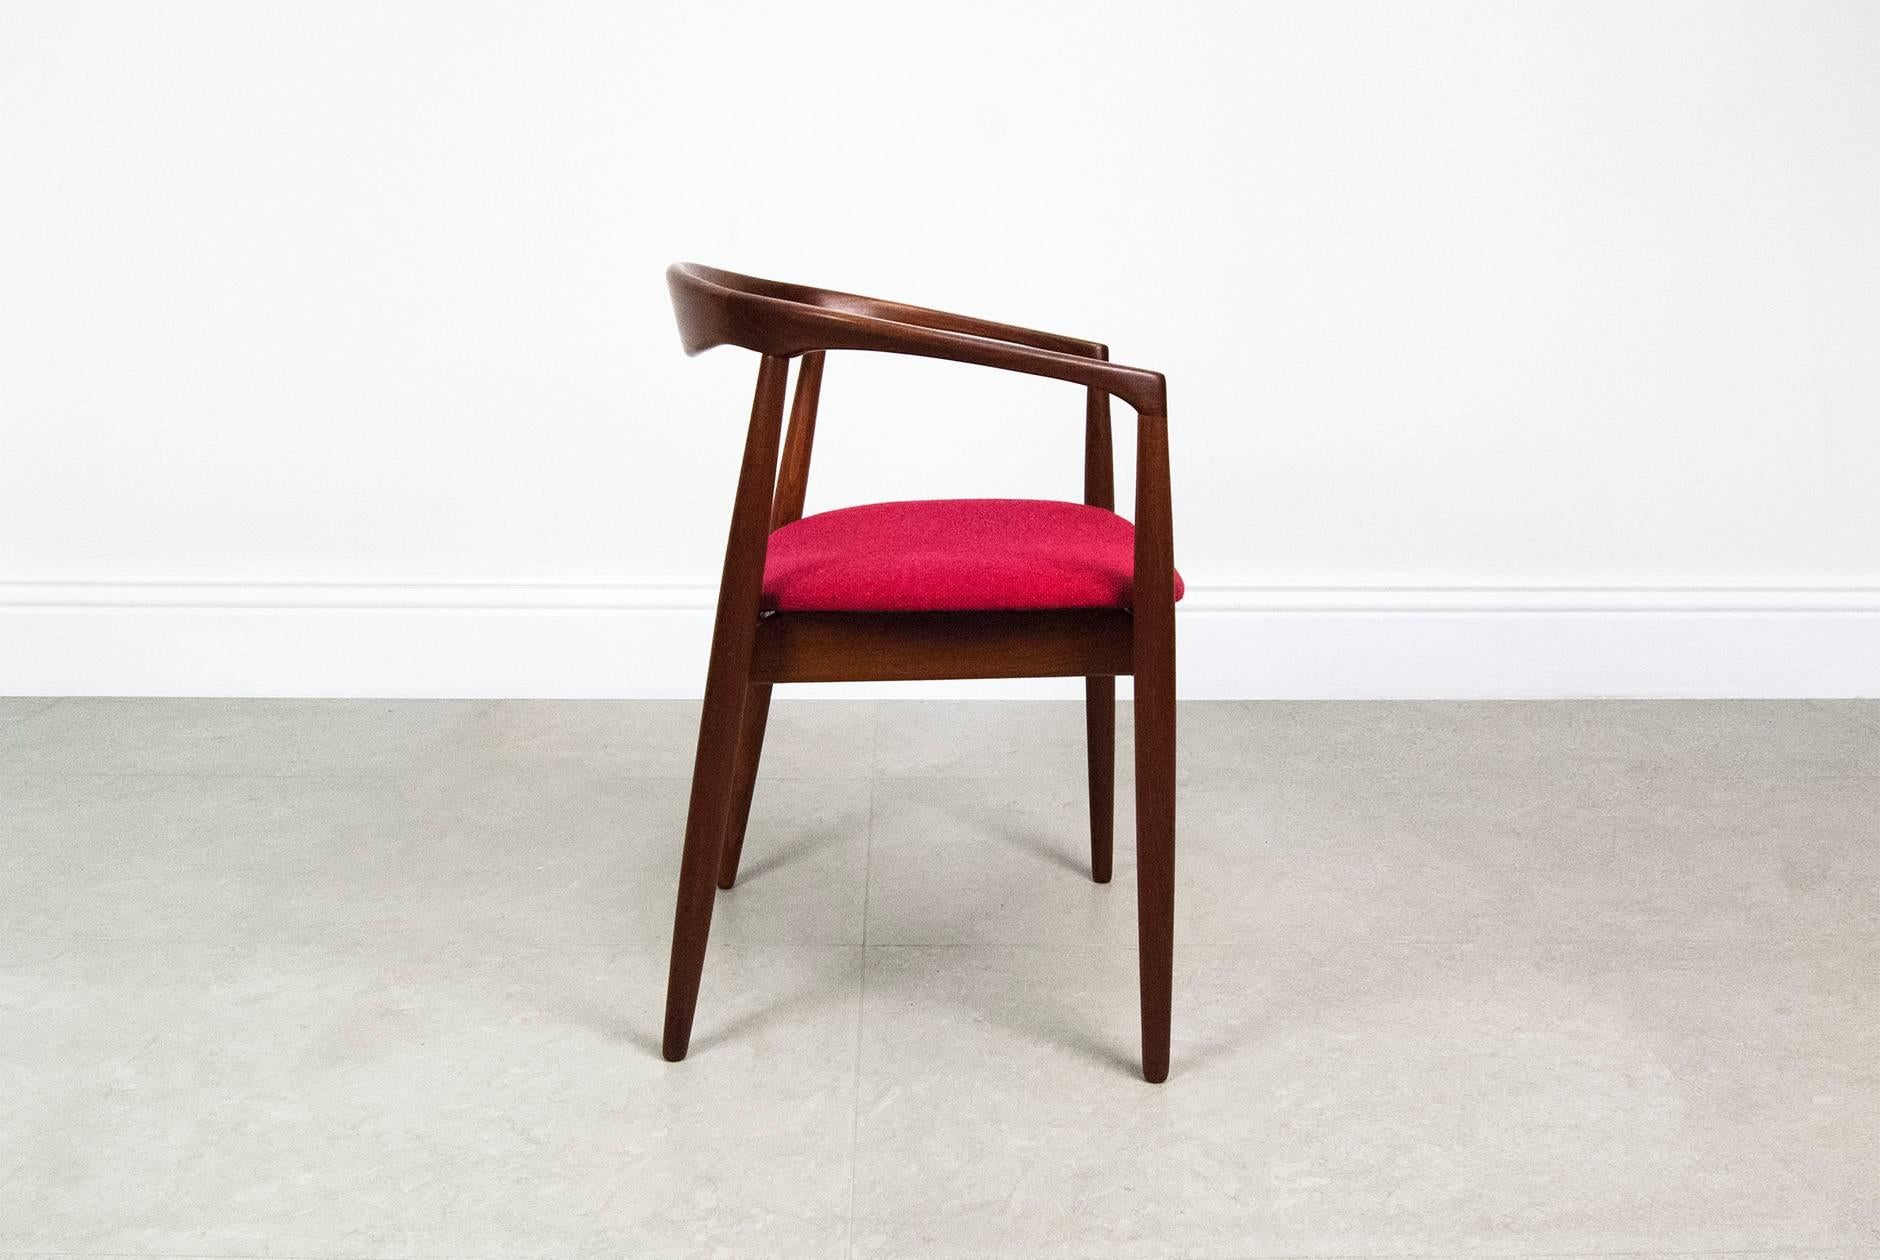 Kai Kristiansen 'Troja' round chair, circa 1960. Afromosia teak round armchair. Seat pad reupholstered in cranberry-red Bute tweed wool fabric.